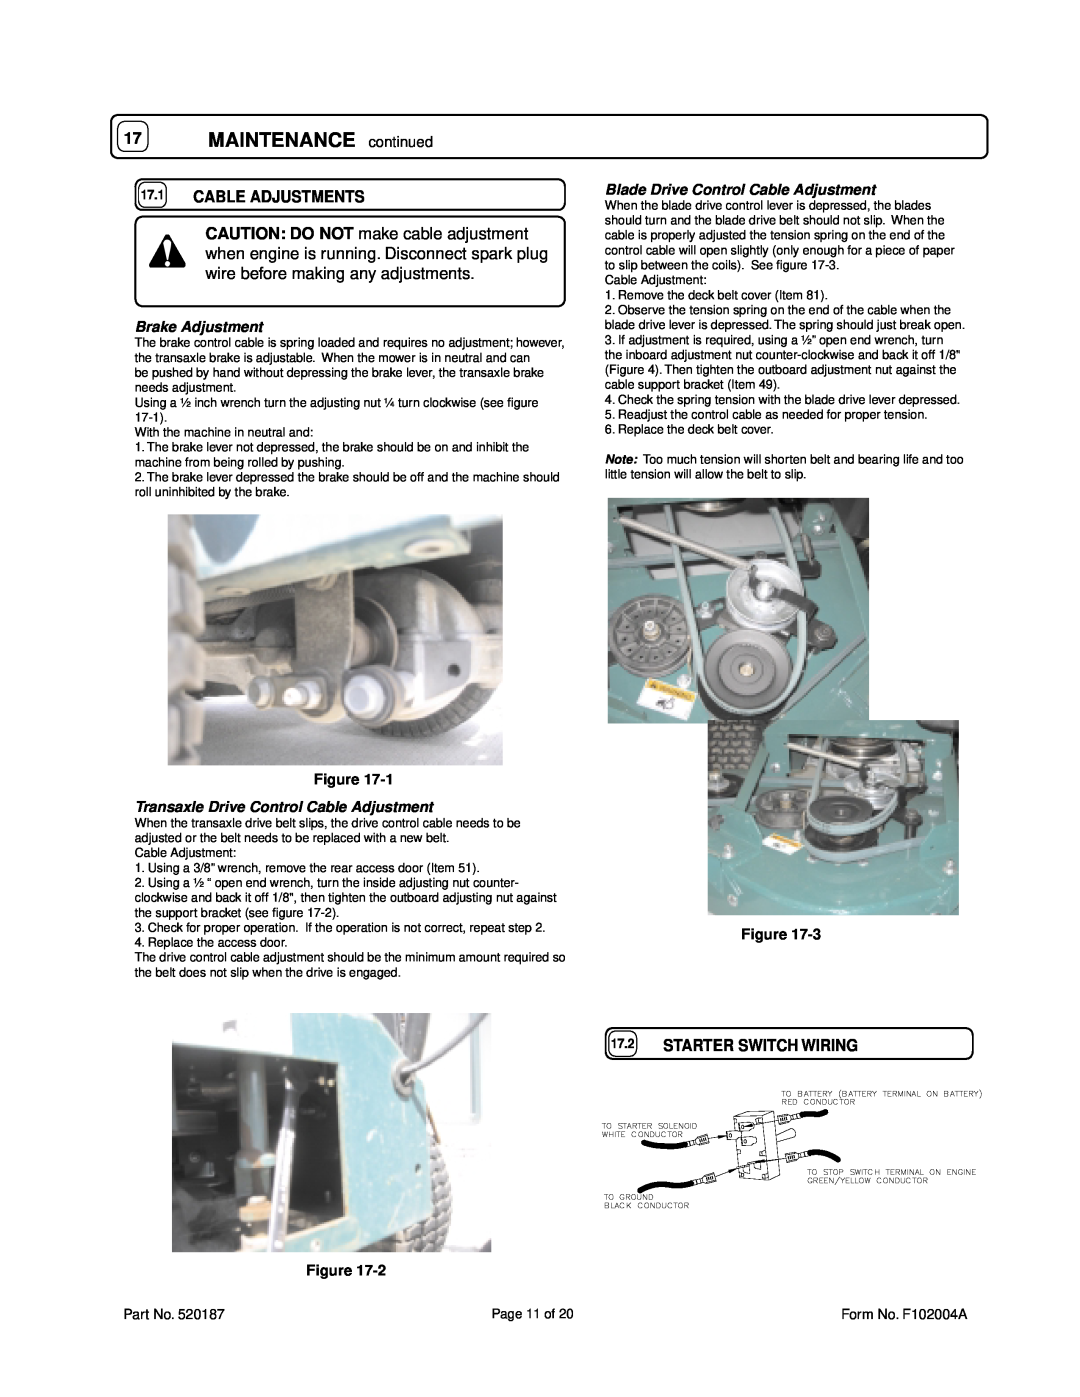 Billy Goat FM3301E owner manual MAINTENANCE continued, Cable Adjustments, Starter Switch Wiring, Brake Adjustment 